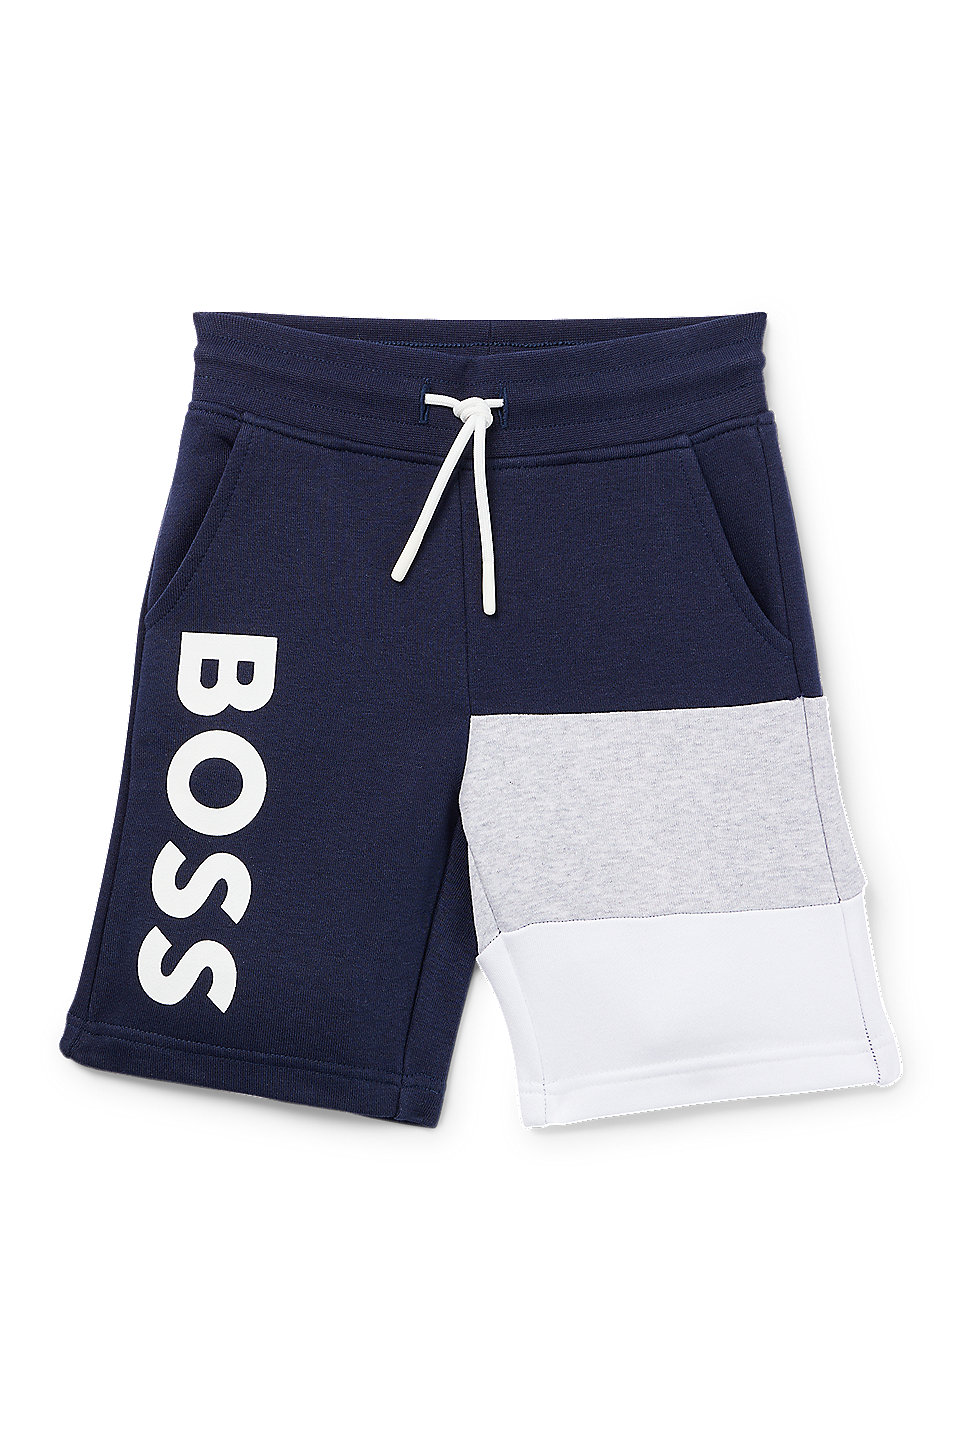 BOSS - Kids' shorts with color-blocking and logo